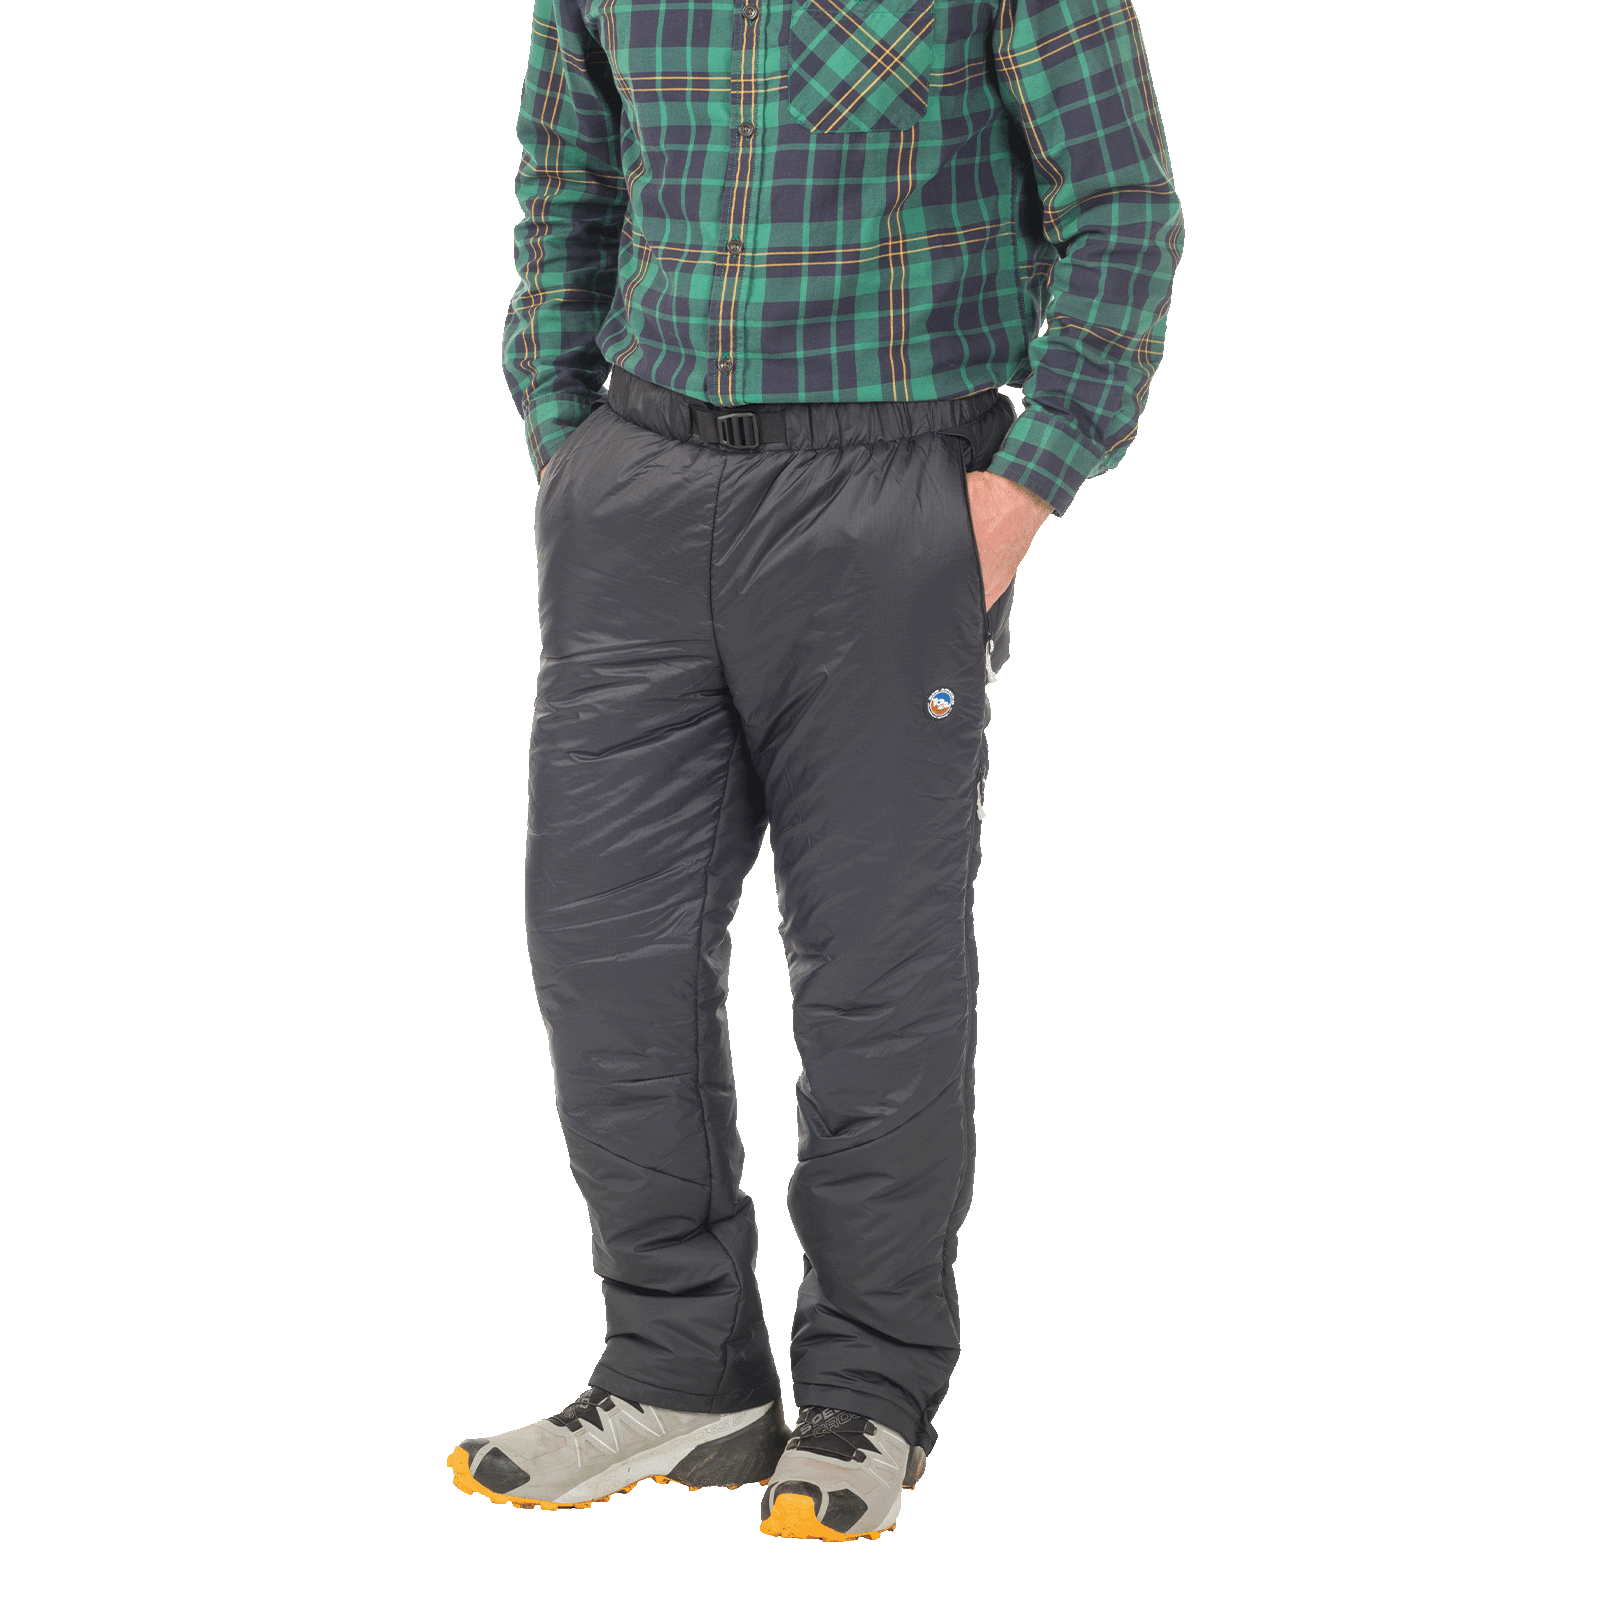 W BLIZZARD INSULATED PANT